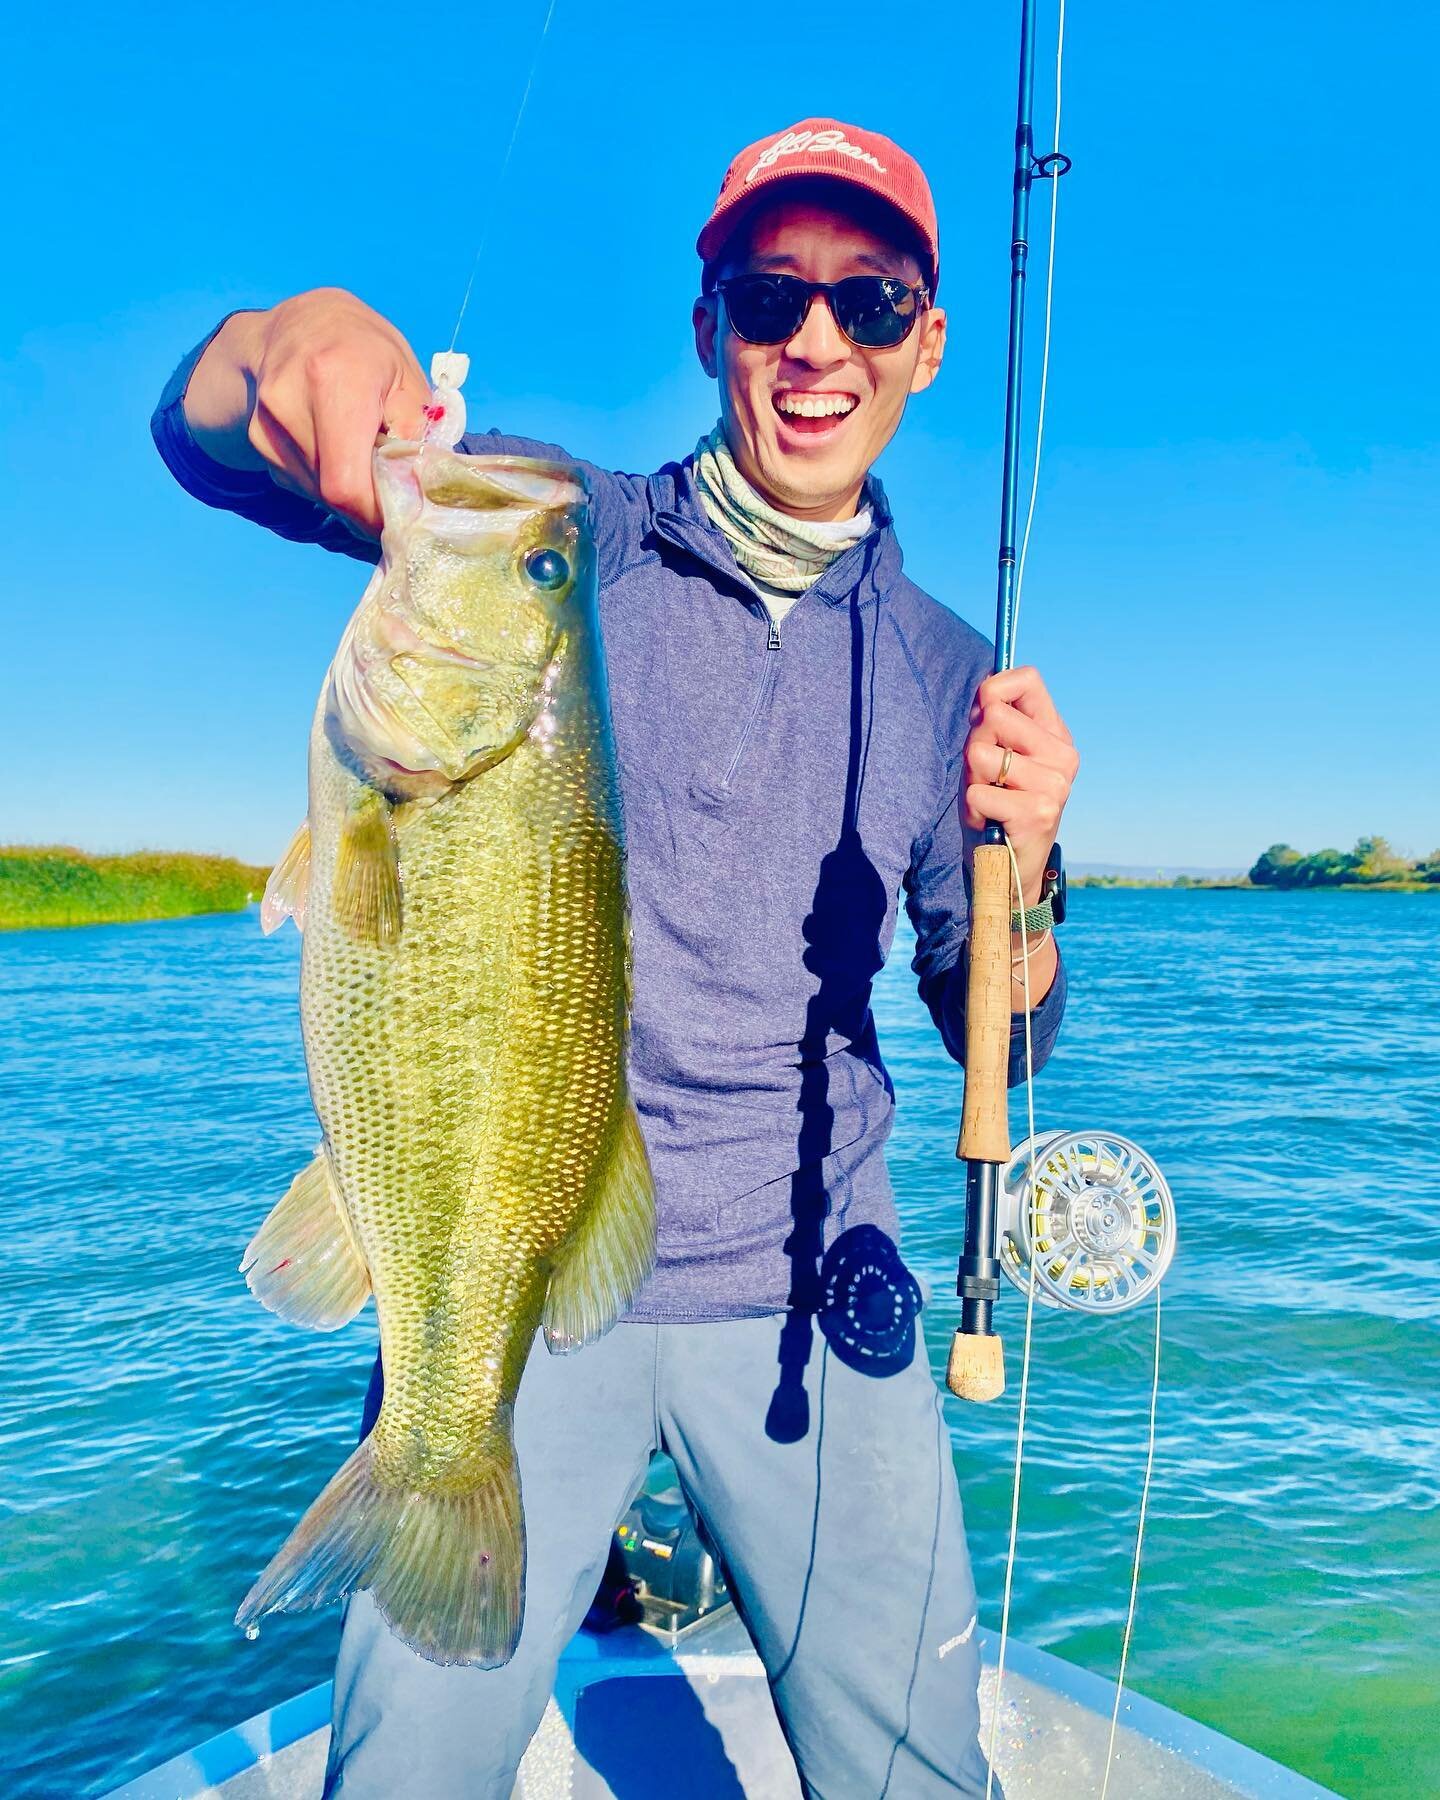 Topwater River monster on the CA Delta! Epic eat &amp; ensuing battle, fun all around! @leehaskin48 Gurgler was on fire today! 🔥 @redingtongear @rioproducts @costasunglasses @simmsfishing @calbassunion #seewhatsoutthere @galvanflyreels